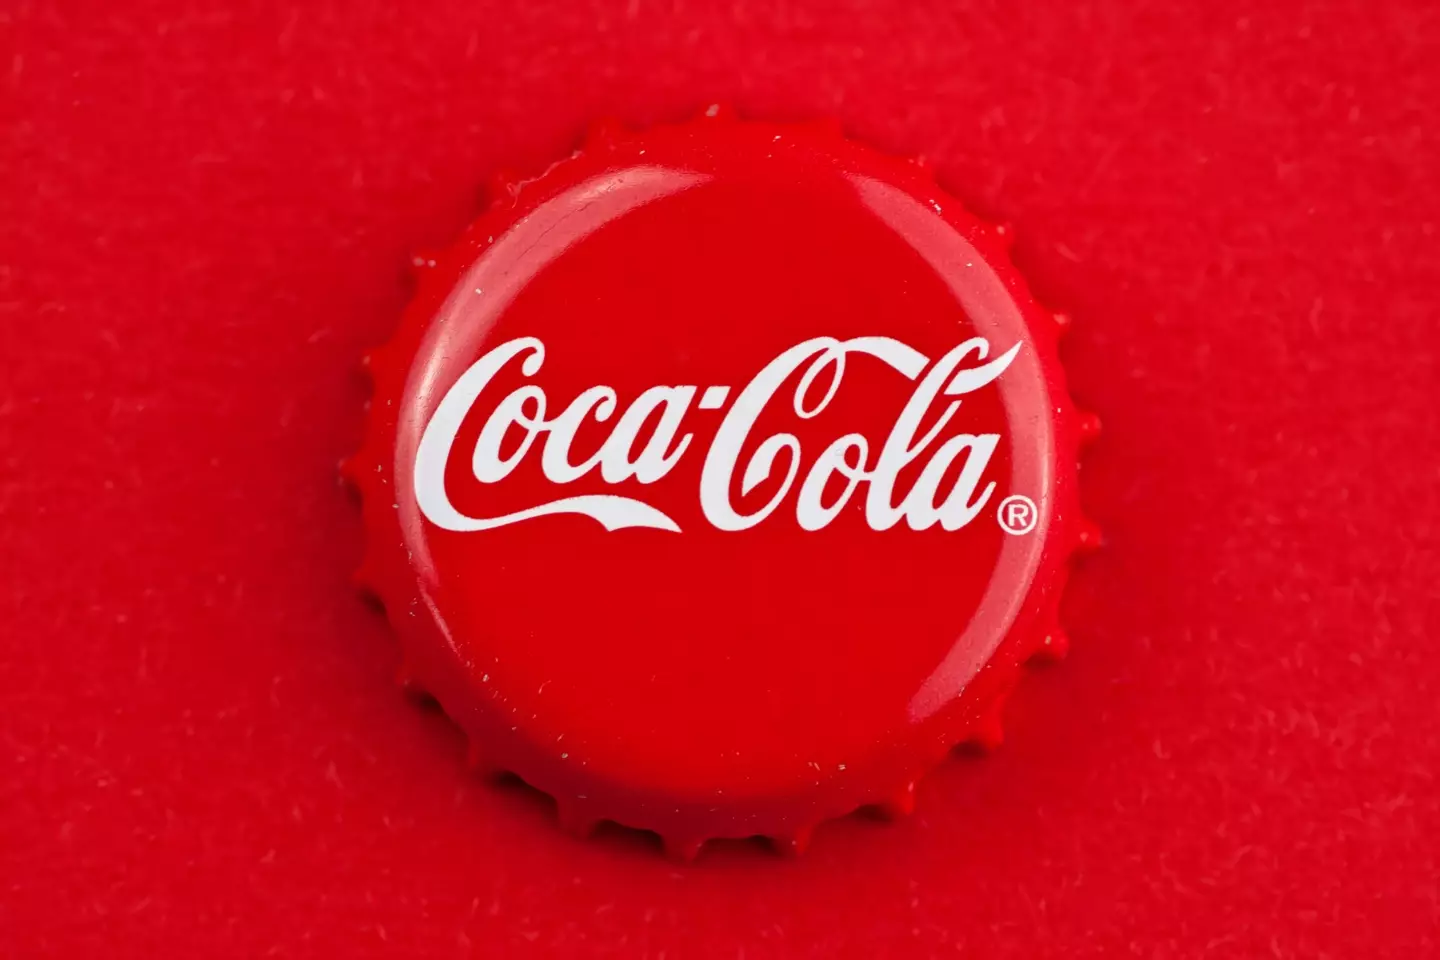 Coca-Cola has revealed what the final flavour in the brand’s Creations line will be.